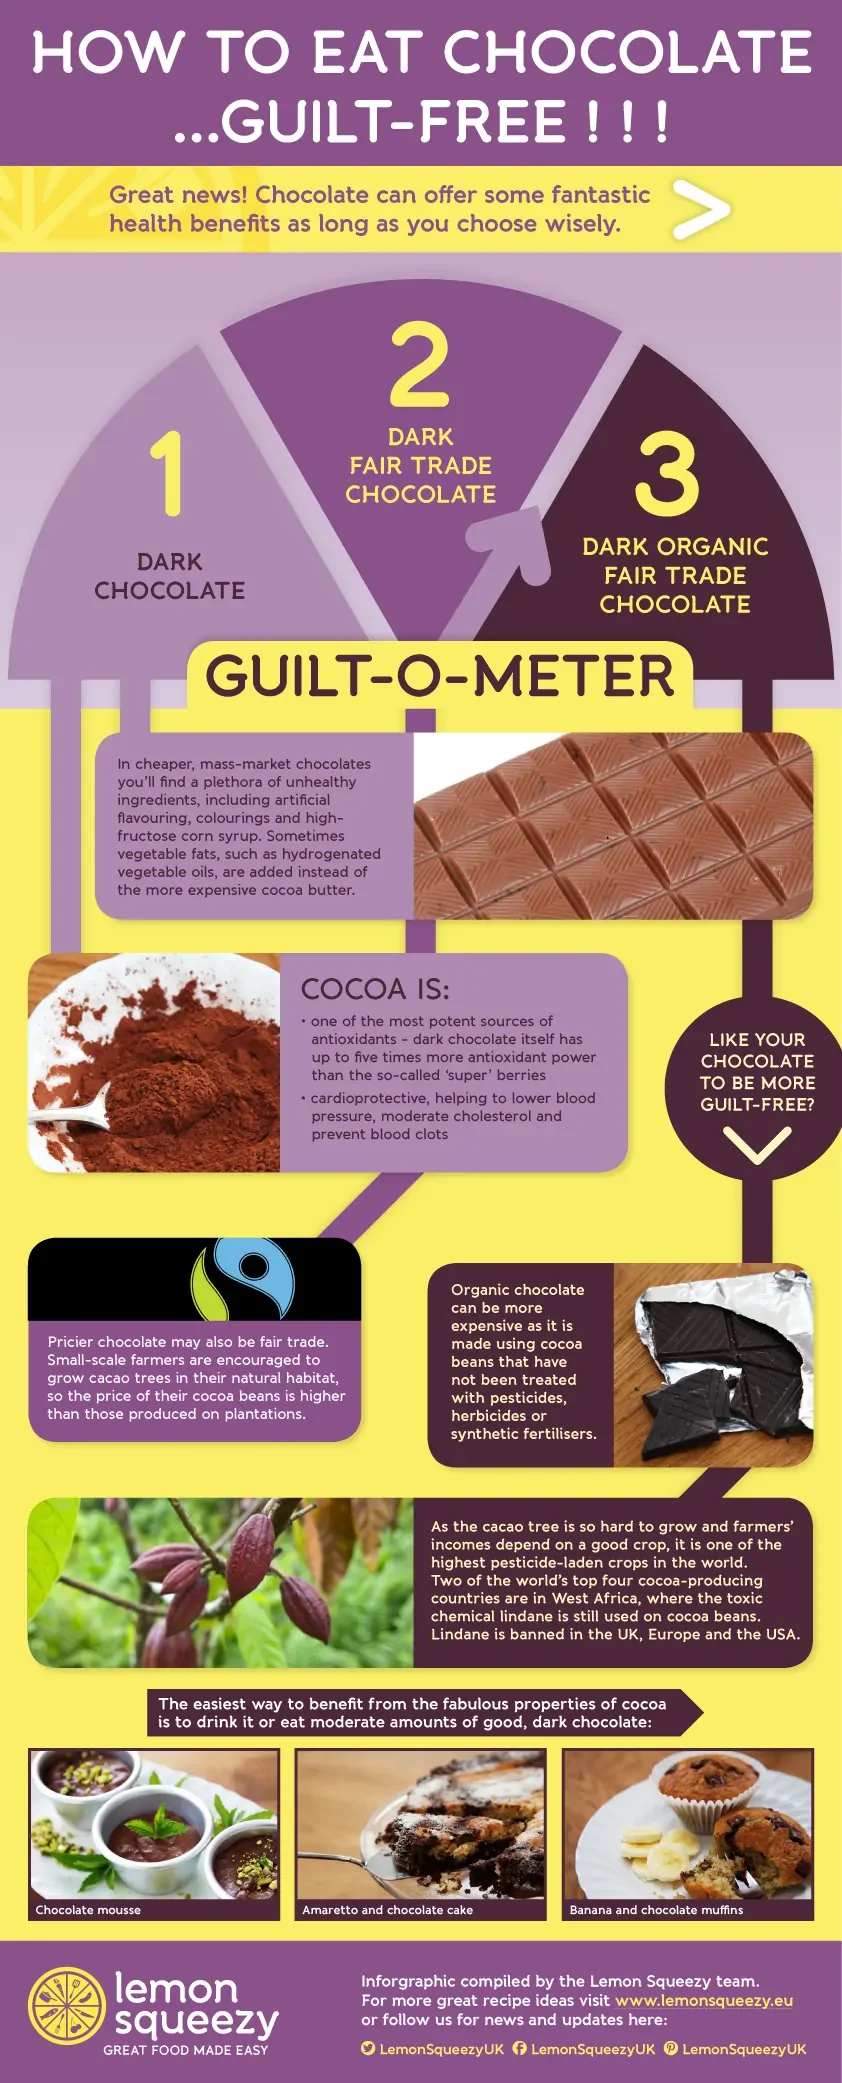 guilt-free chocolate infographic